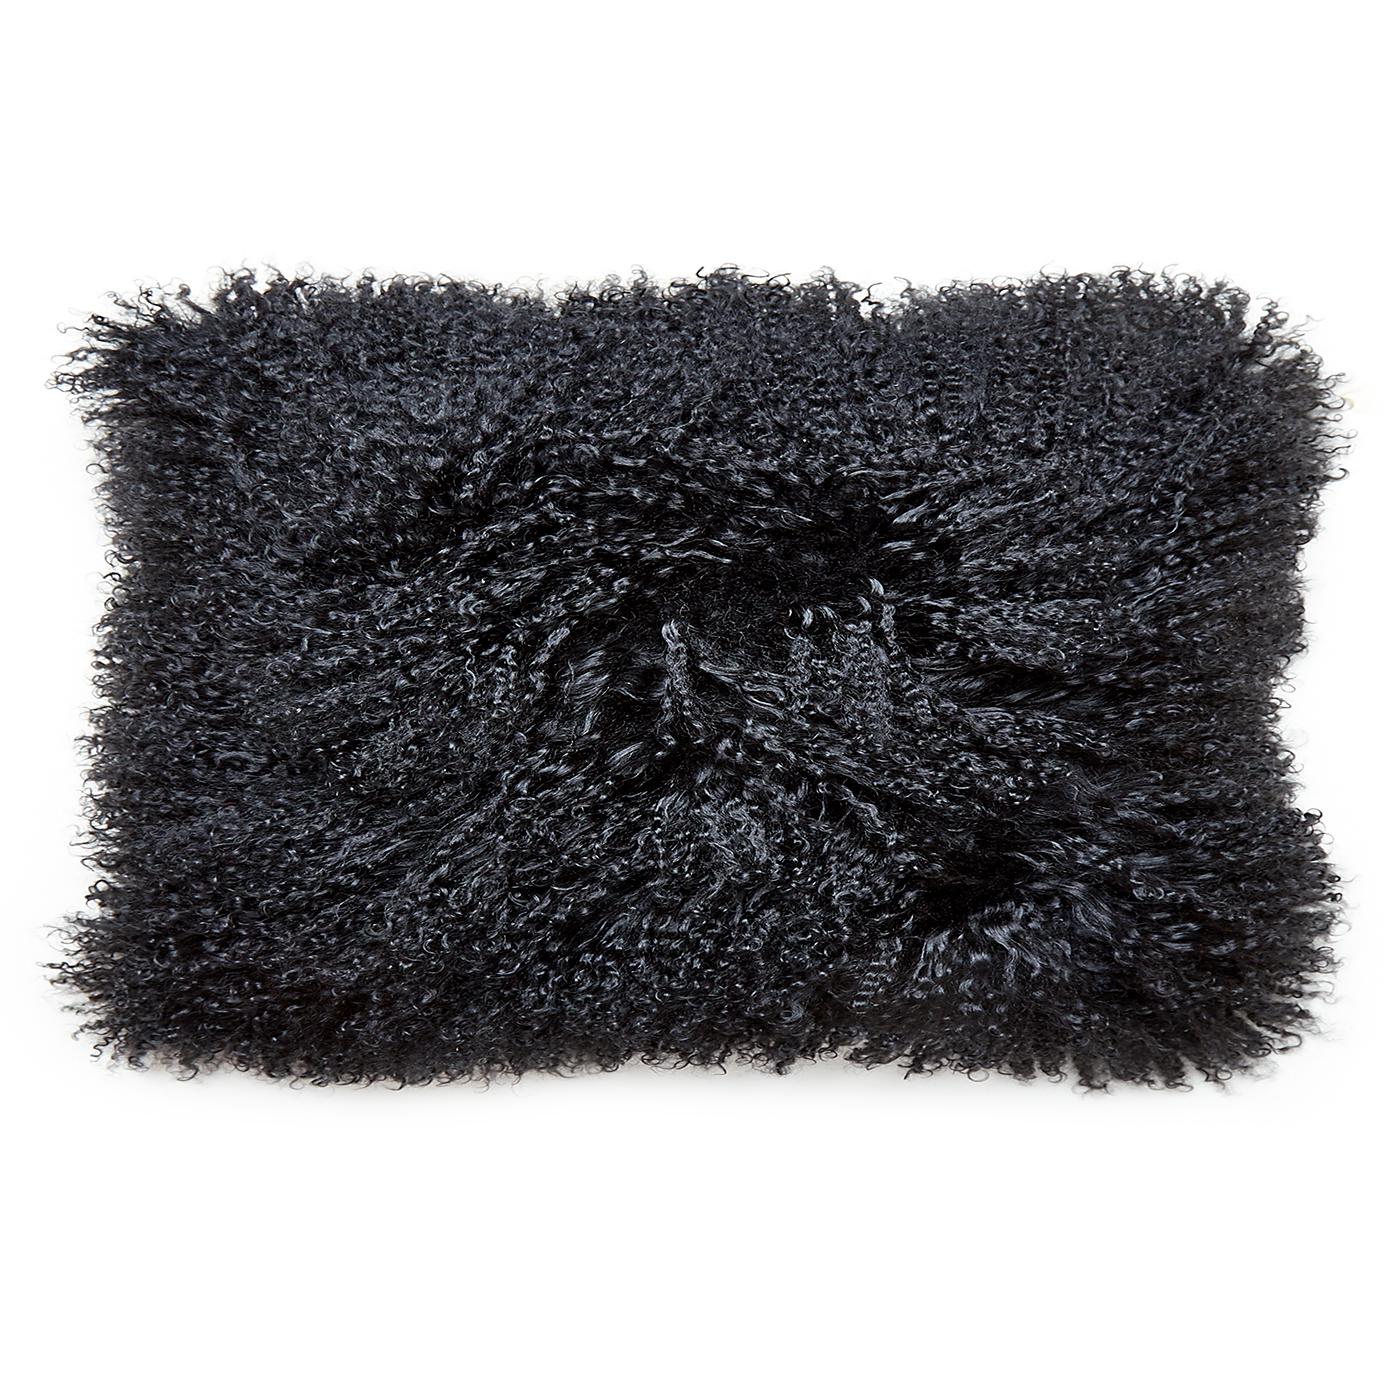 Trippy texture. Made from luxe Mongolian sheep fur, this pair of two pillows will add soft-focus glamour to your sofa or bedscape. Chic up your chalet, perk up your penthouse, or stylize your studio.

Specs:
100% Mongolian lamb hair face
100%